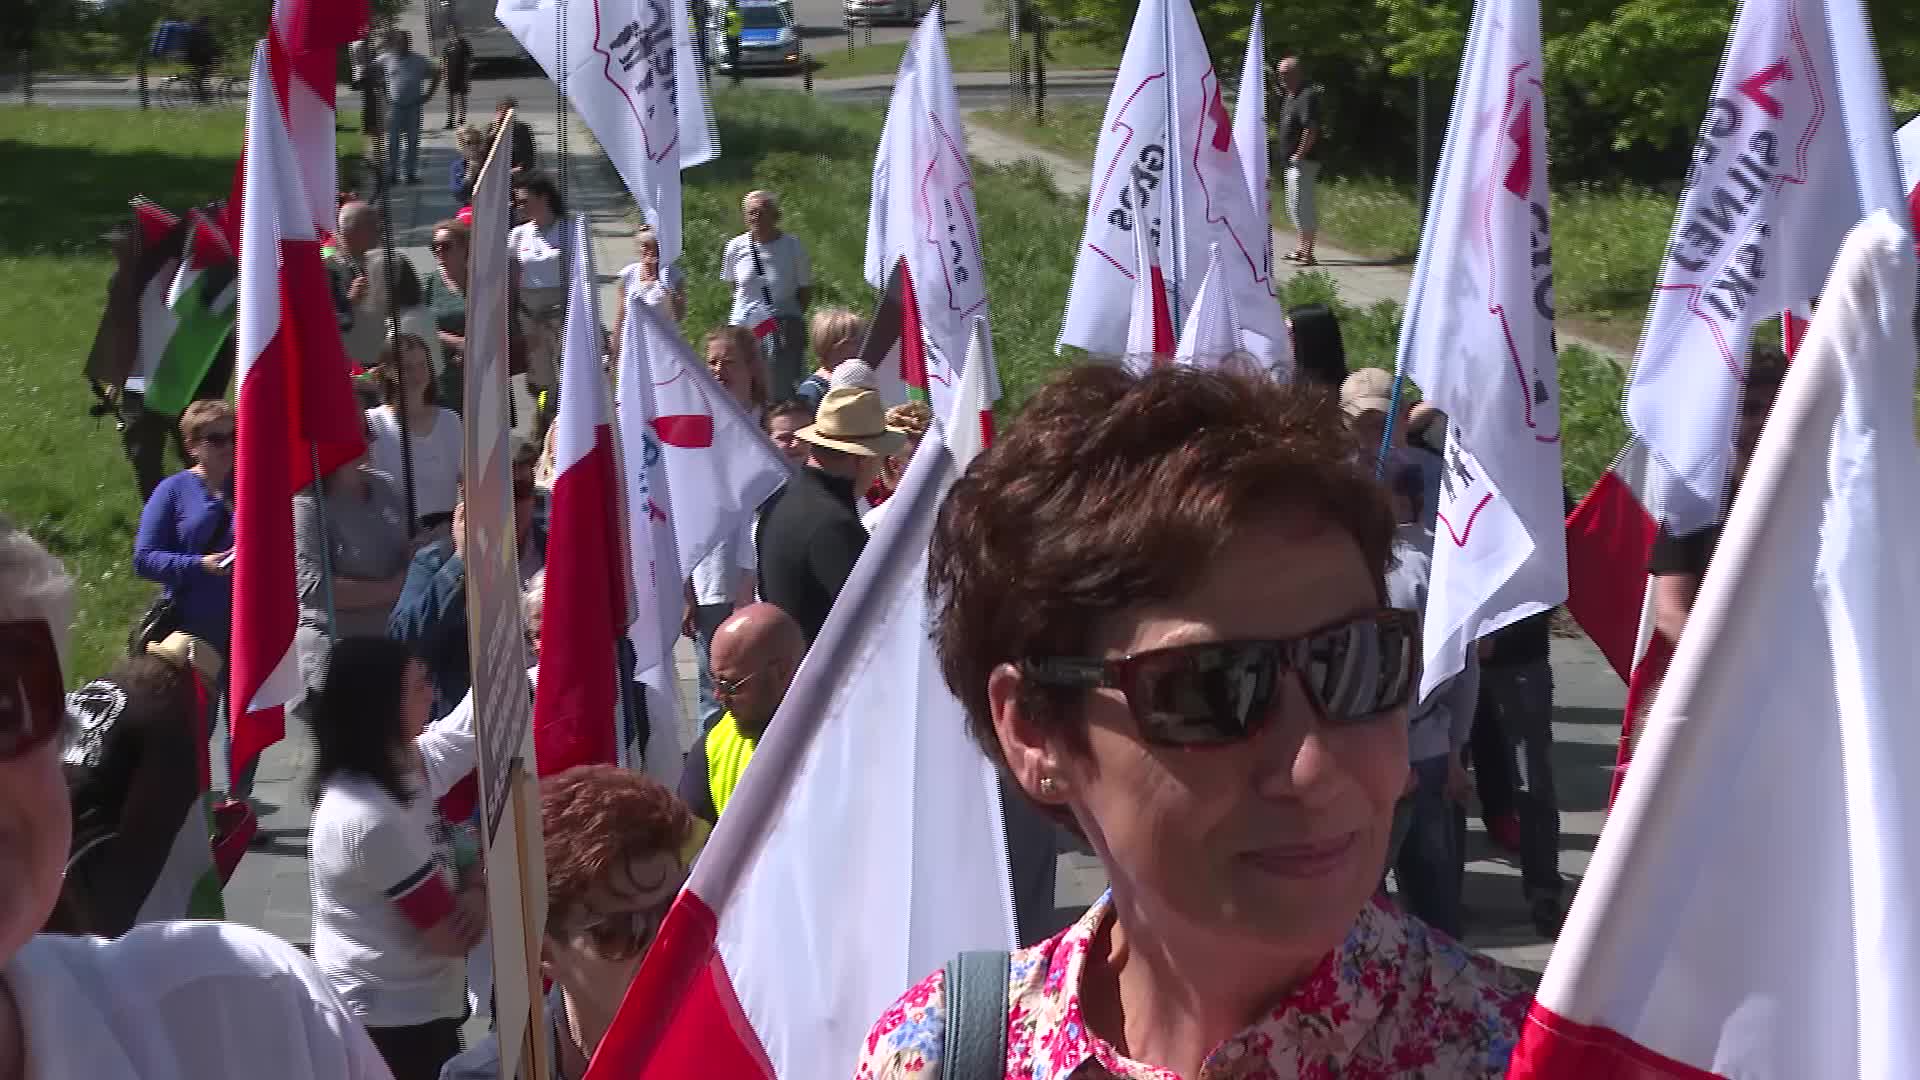 'This Is Not Our War' - Rally against Polish involvement in Russia-Ukraine conflict